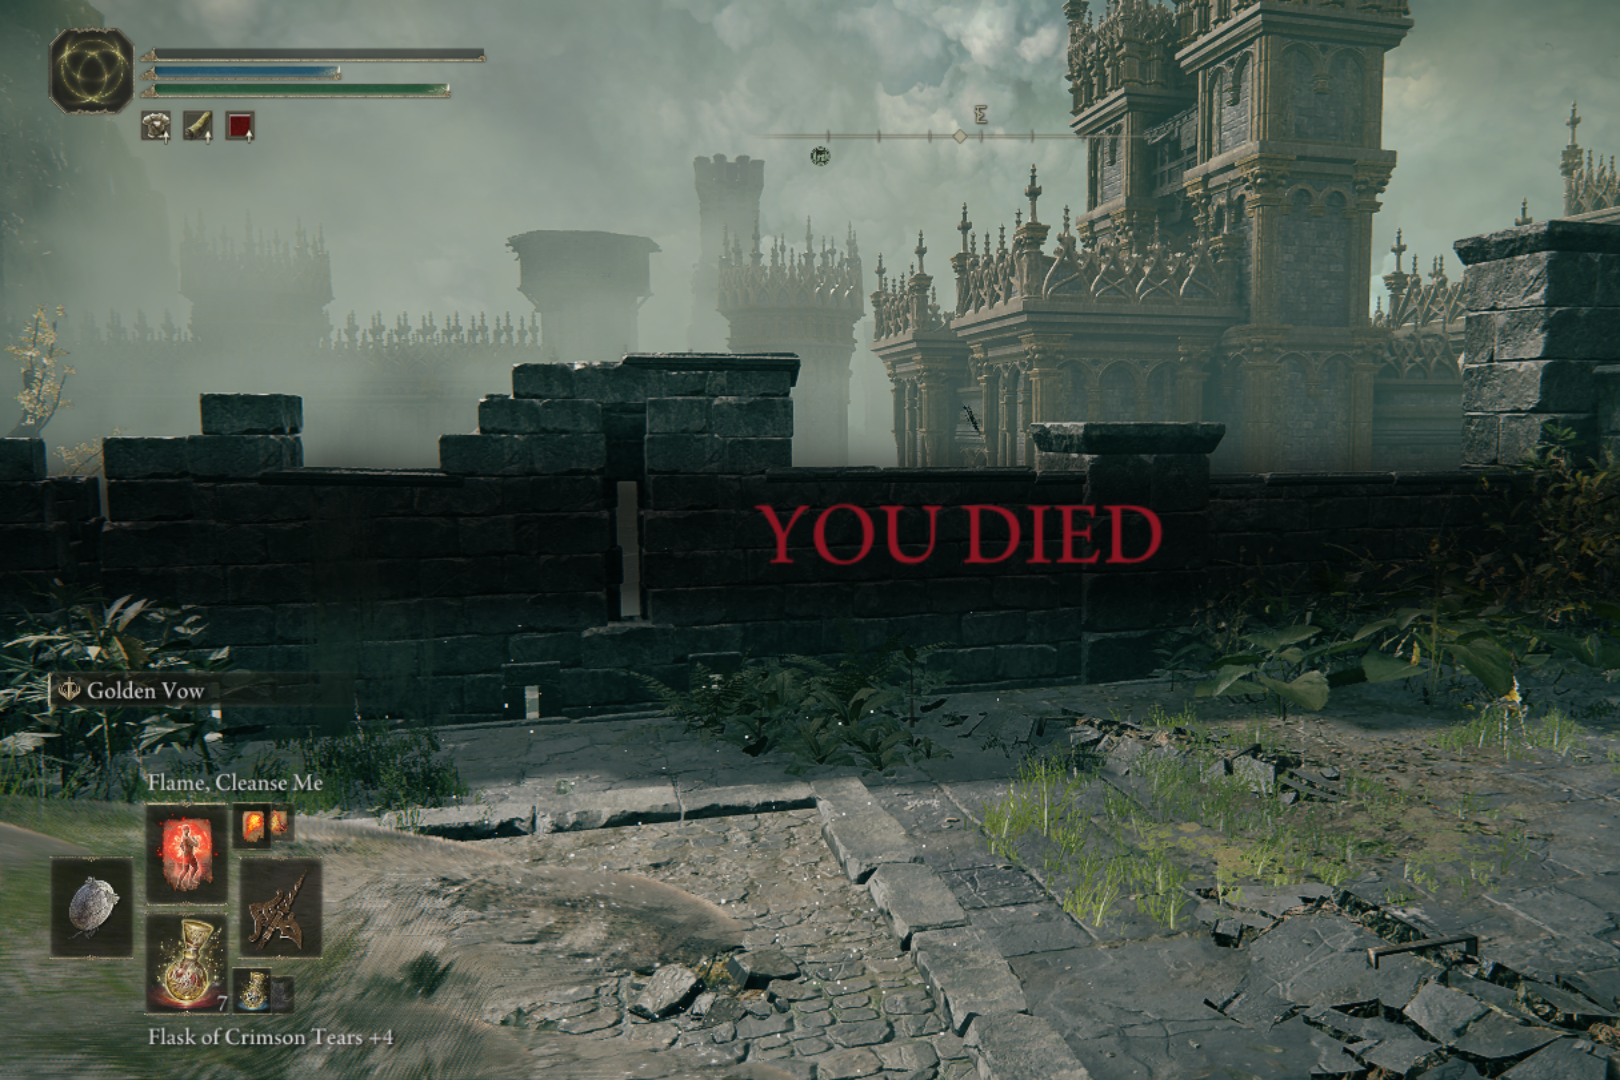 Screengrab from the game of a devastated landscape that reads YOU DIED in red text in the center